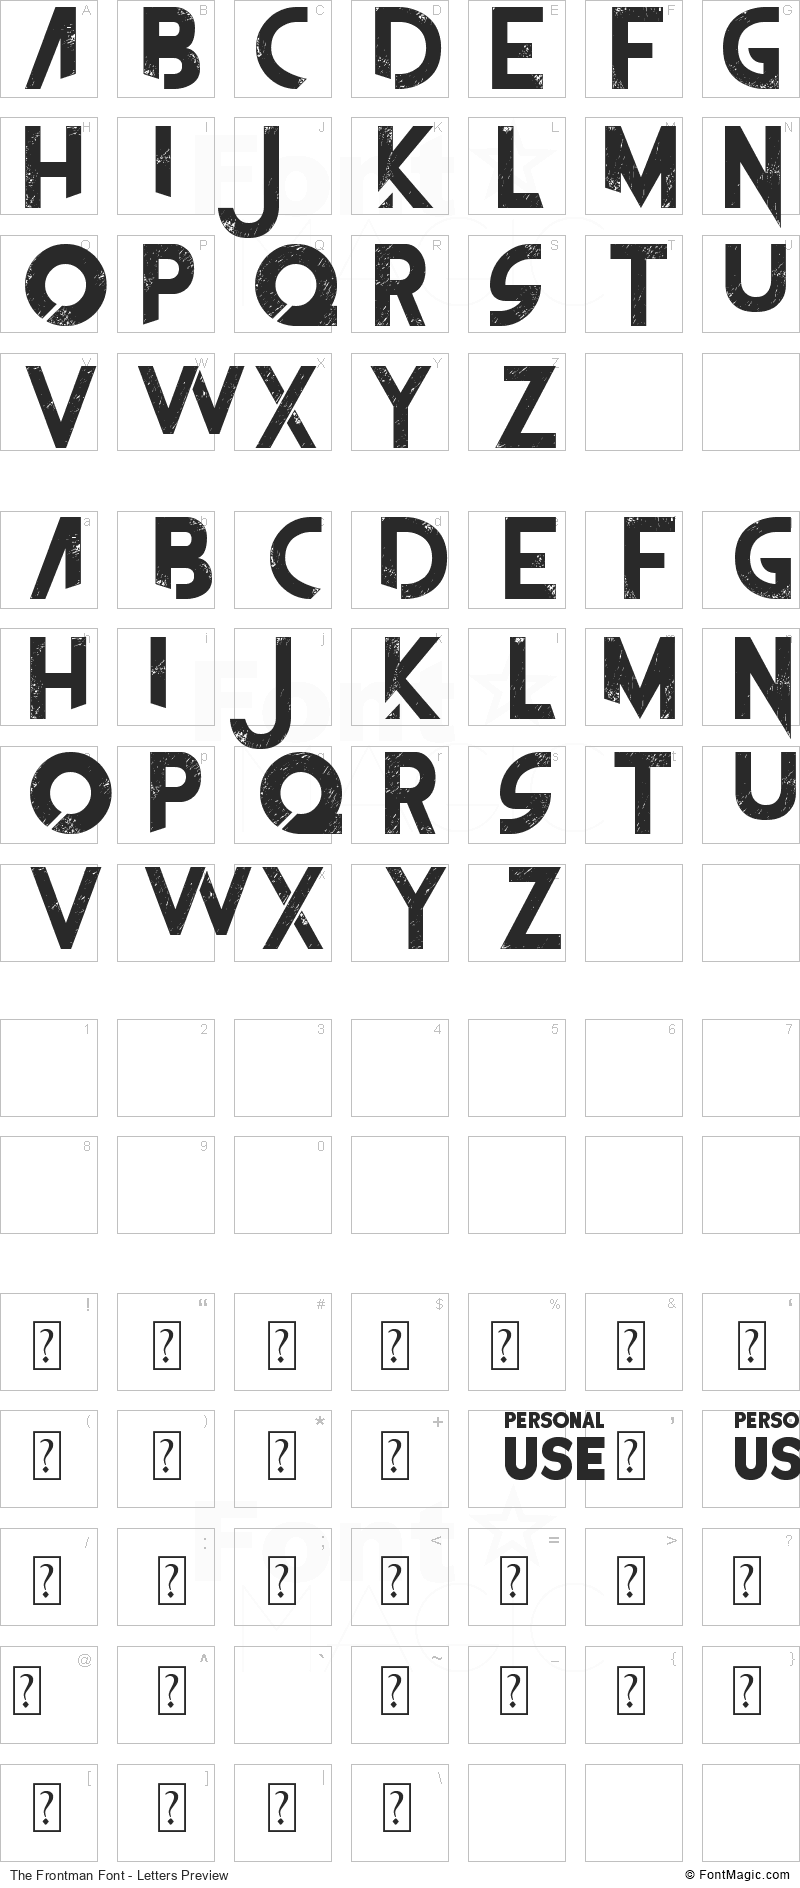 The Frontman Font - All Latters Preview Chart